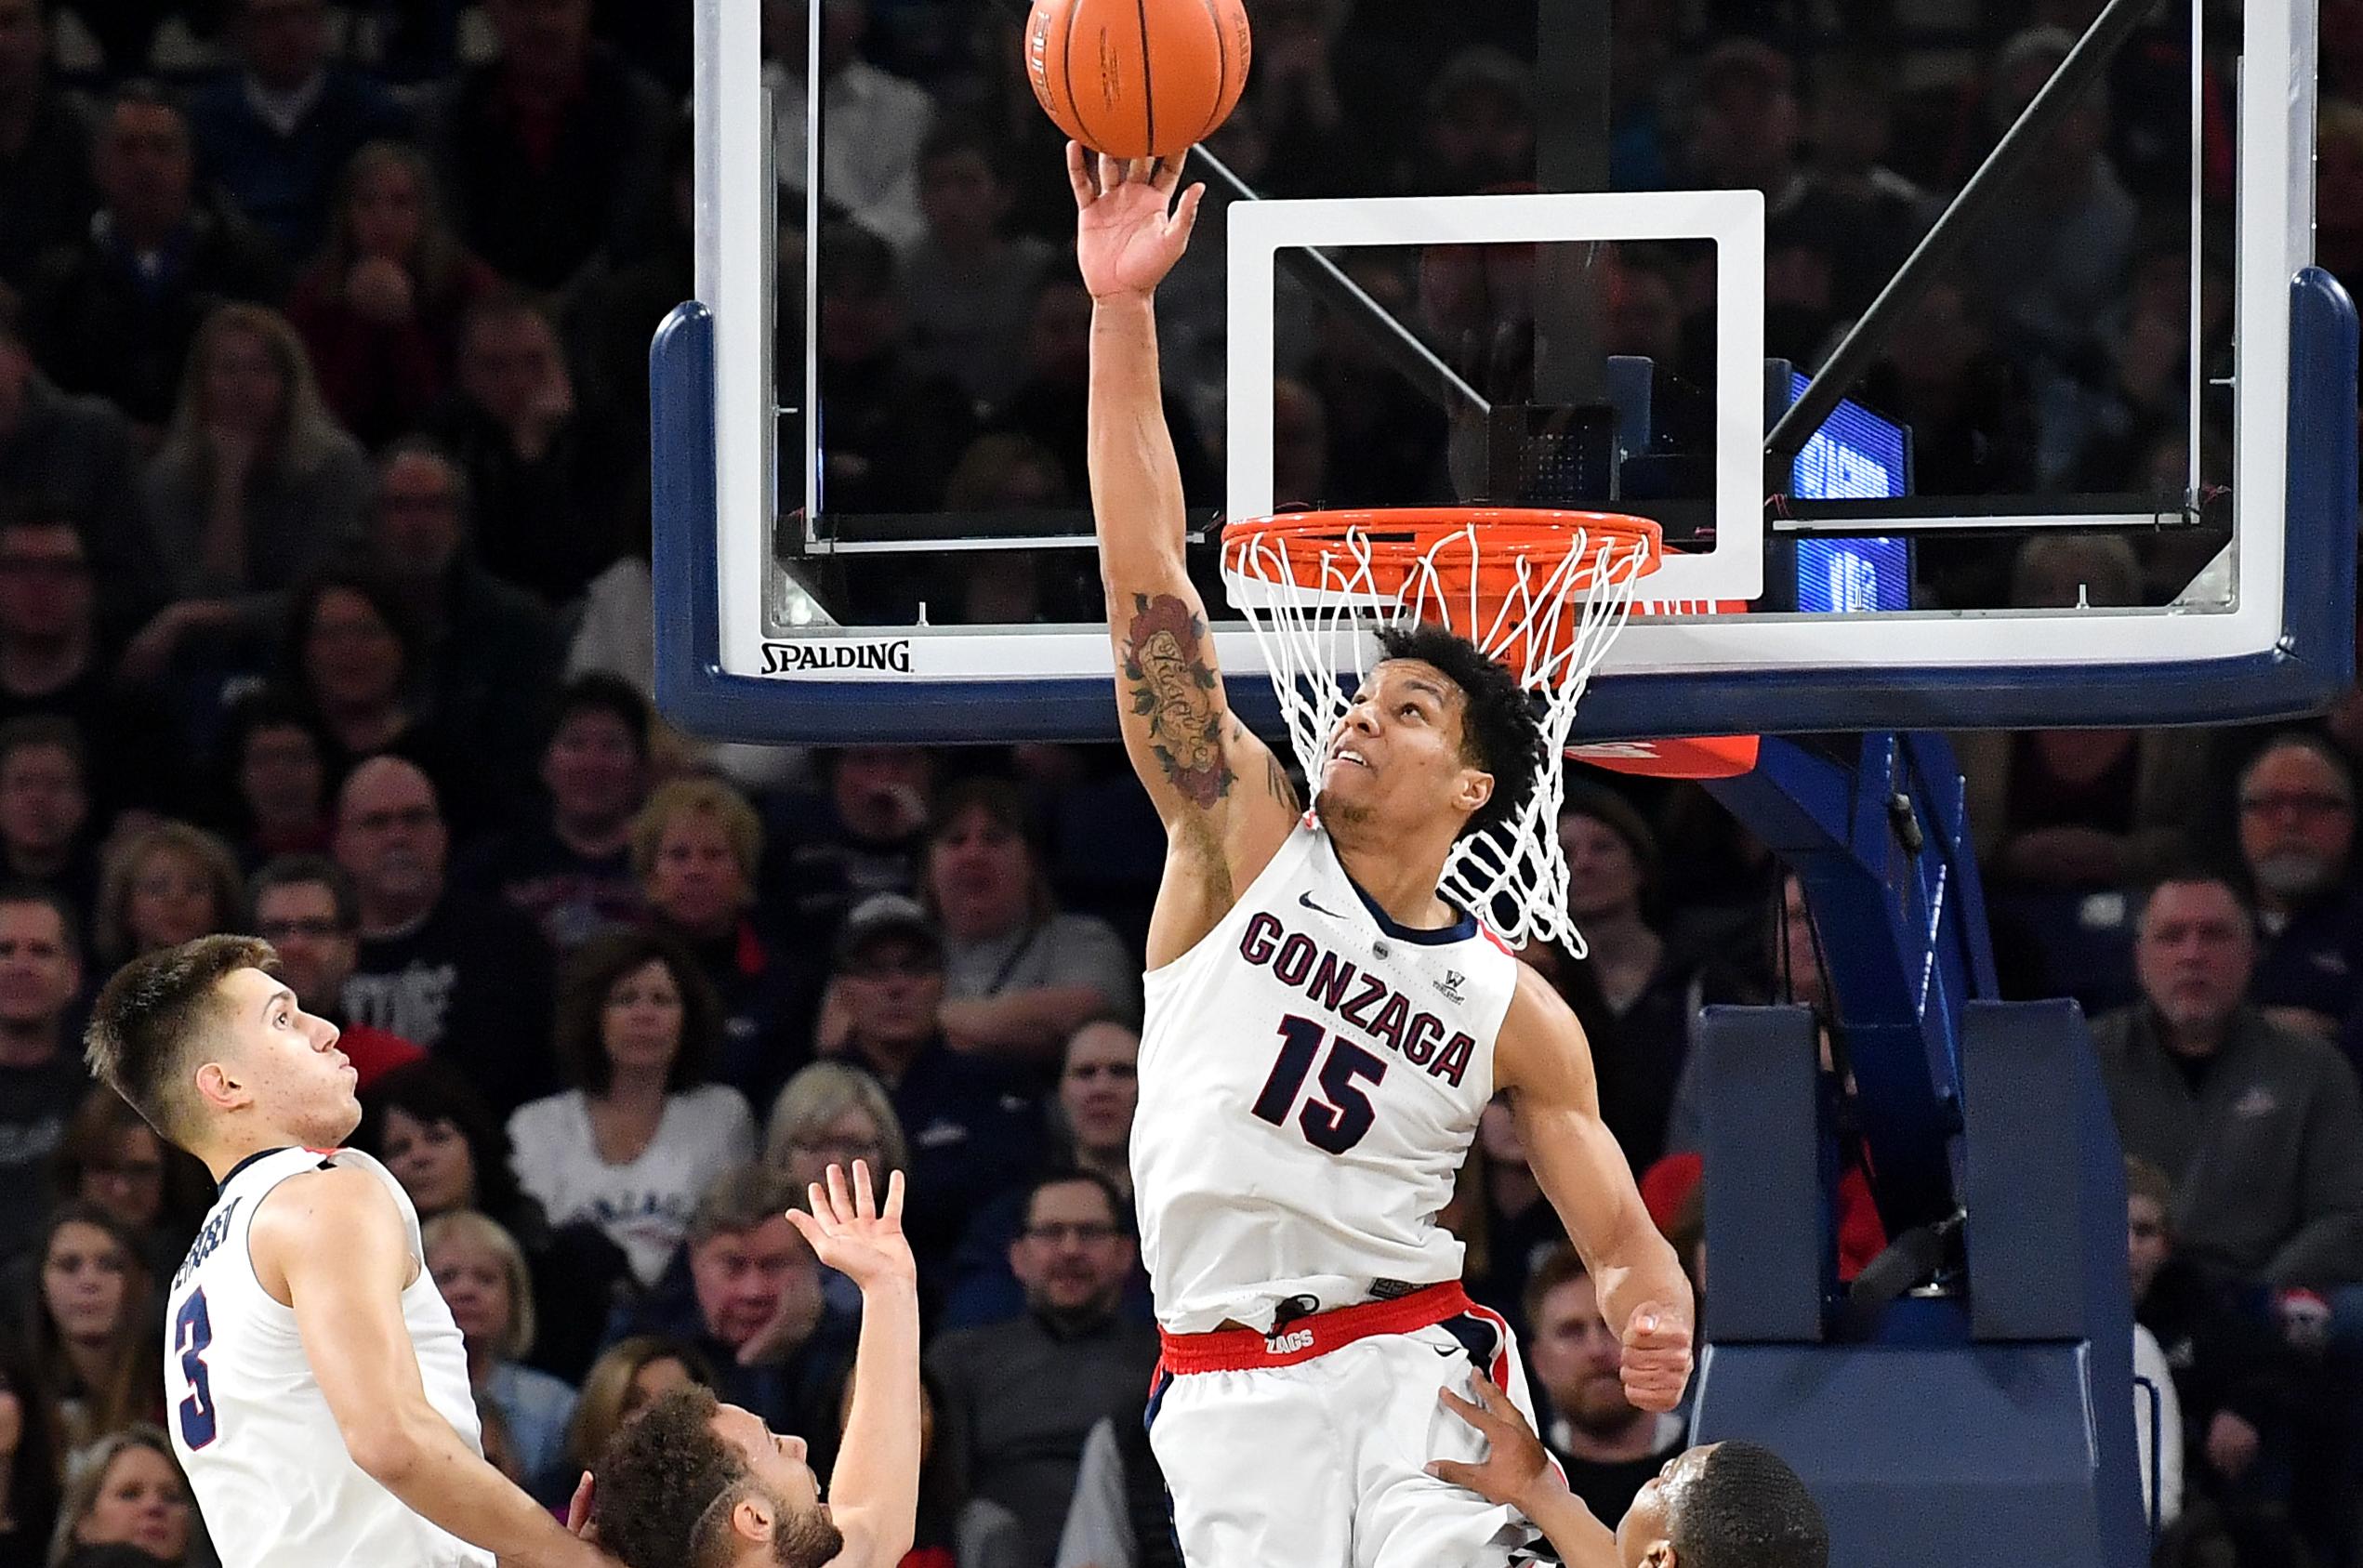 Gonzaga’s Brandon Clarke named semifinalist for Naismith defensive player of the ...2542 x 1687